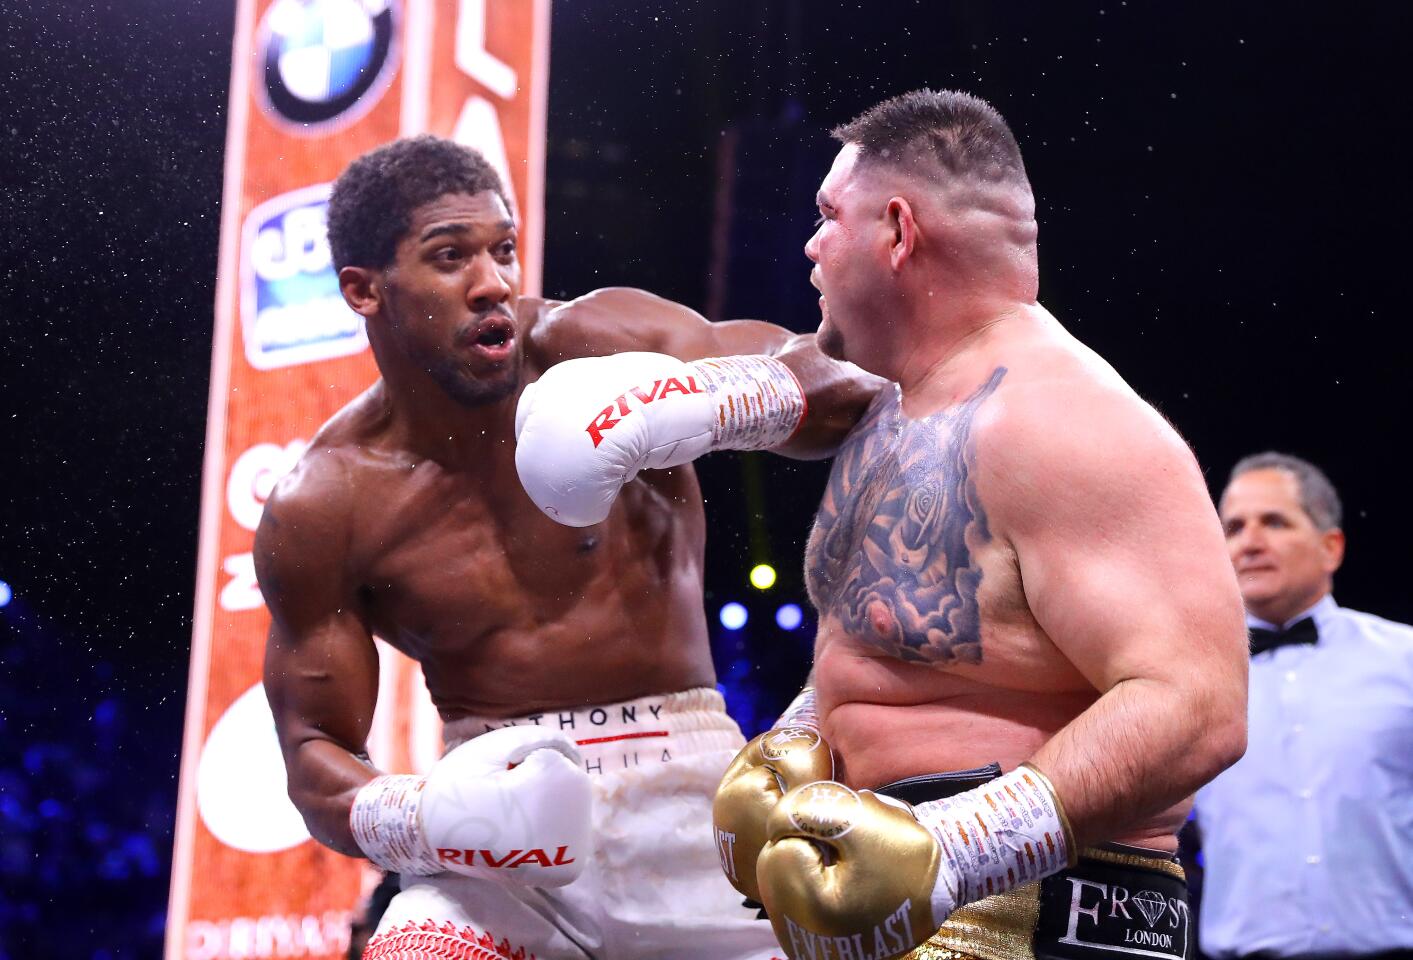 Andy Ruiz Jr. and Anthony Joshua exchange punches during a heavyweight title fight on Dec. 7 in Diriyah, Saudi Arabia.